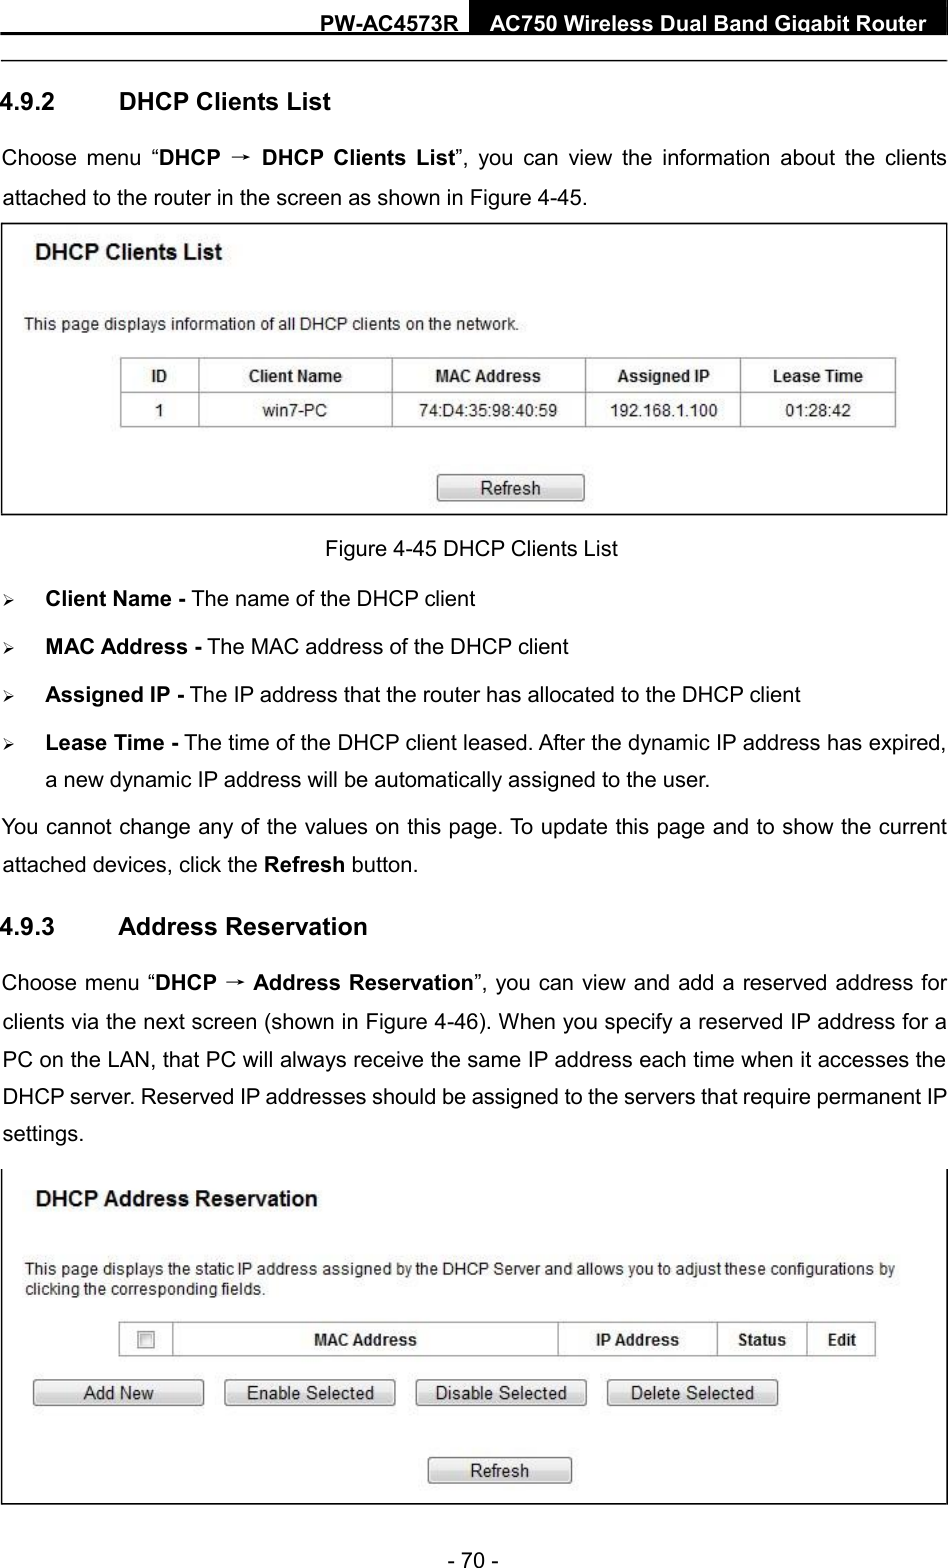  - 70 -  PW - AC4573R   AC750 Wireless Dual Band Gigabit Router     4.9.2  DHCP Clients List  Choose  menu  “DHCP  →  DHCP  Clients  List”,  you  can  view  the  information  about  the  clients attached to the router in the screen as shown in Figure 4-45.    Client Name - The name of the DHCP client    MAC Address - The MAC address of the DHCP client    Assigned IP - The IP address that the router has allocated to the DHCP client   Lease Time - The time of the DHCP client leased. After the dynamic IP address has expired, a new dynamic IP address will be automatically assigned to the user.    You cannot change any of the values on this page. To update this page and to show the current attached devices, click the Refresh button.  4.9.3  Address Reservation  Choose menu “DHCP → Address Reservation”, you can view and add a reserved address for clients via the next screen (shown in Figure 4-46). When you specify a reserved IP address for a PC on the LAN, that PC will always receive the same IP address each time when it accesses the DHCP server. Reserved IP addresses should be assigned to the servers that require permanent IP settings.      Figure 4-45 DHCP Clients List    